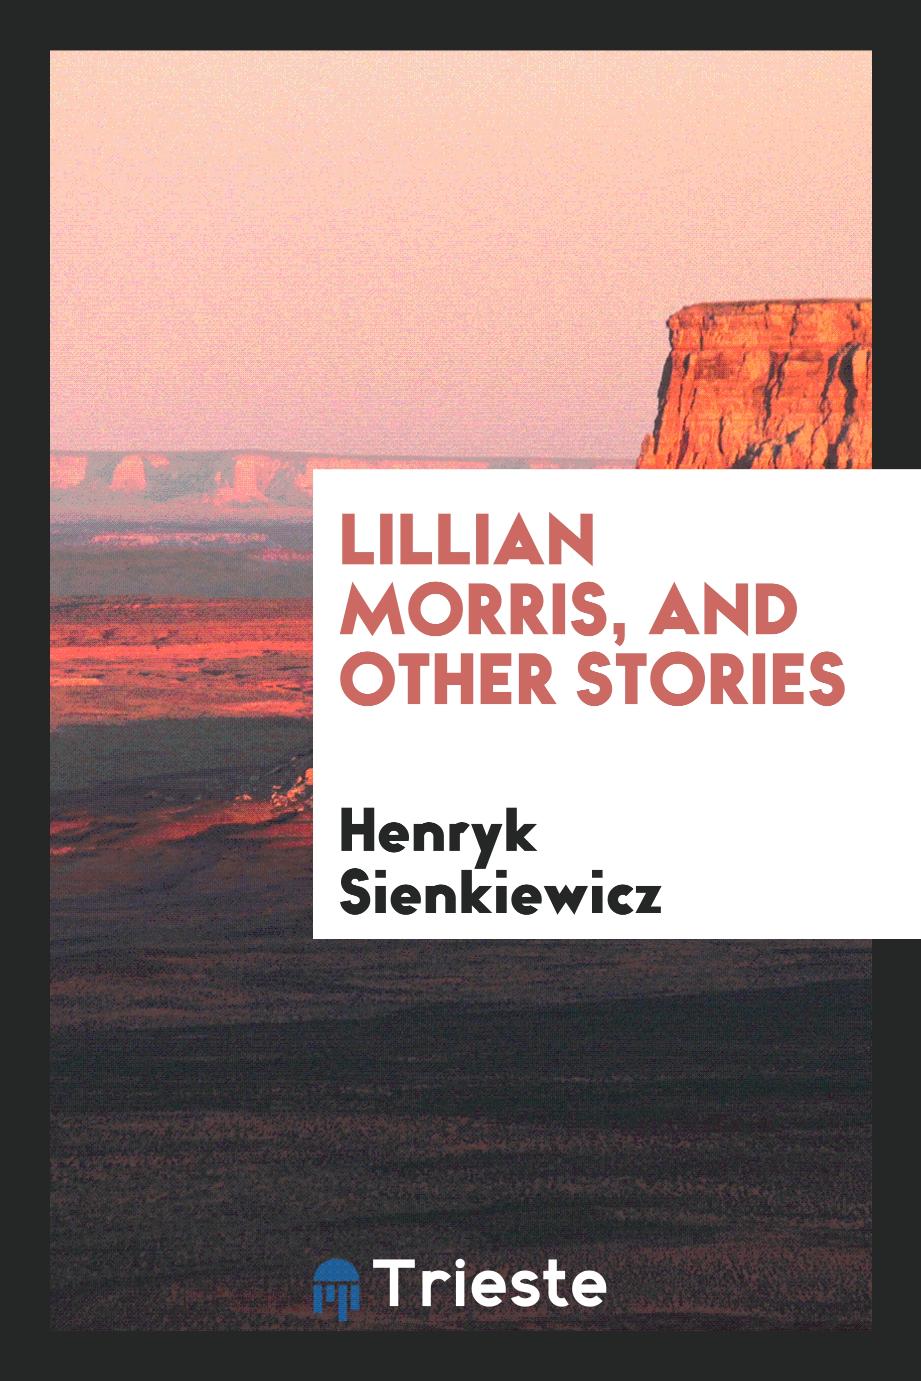 Lillian Morris, and other stories